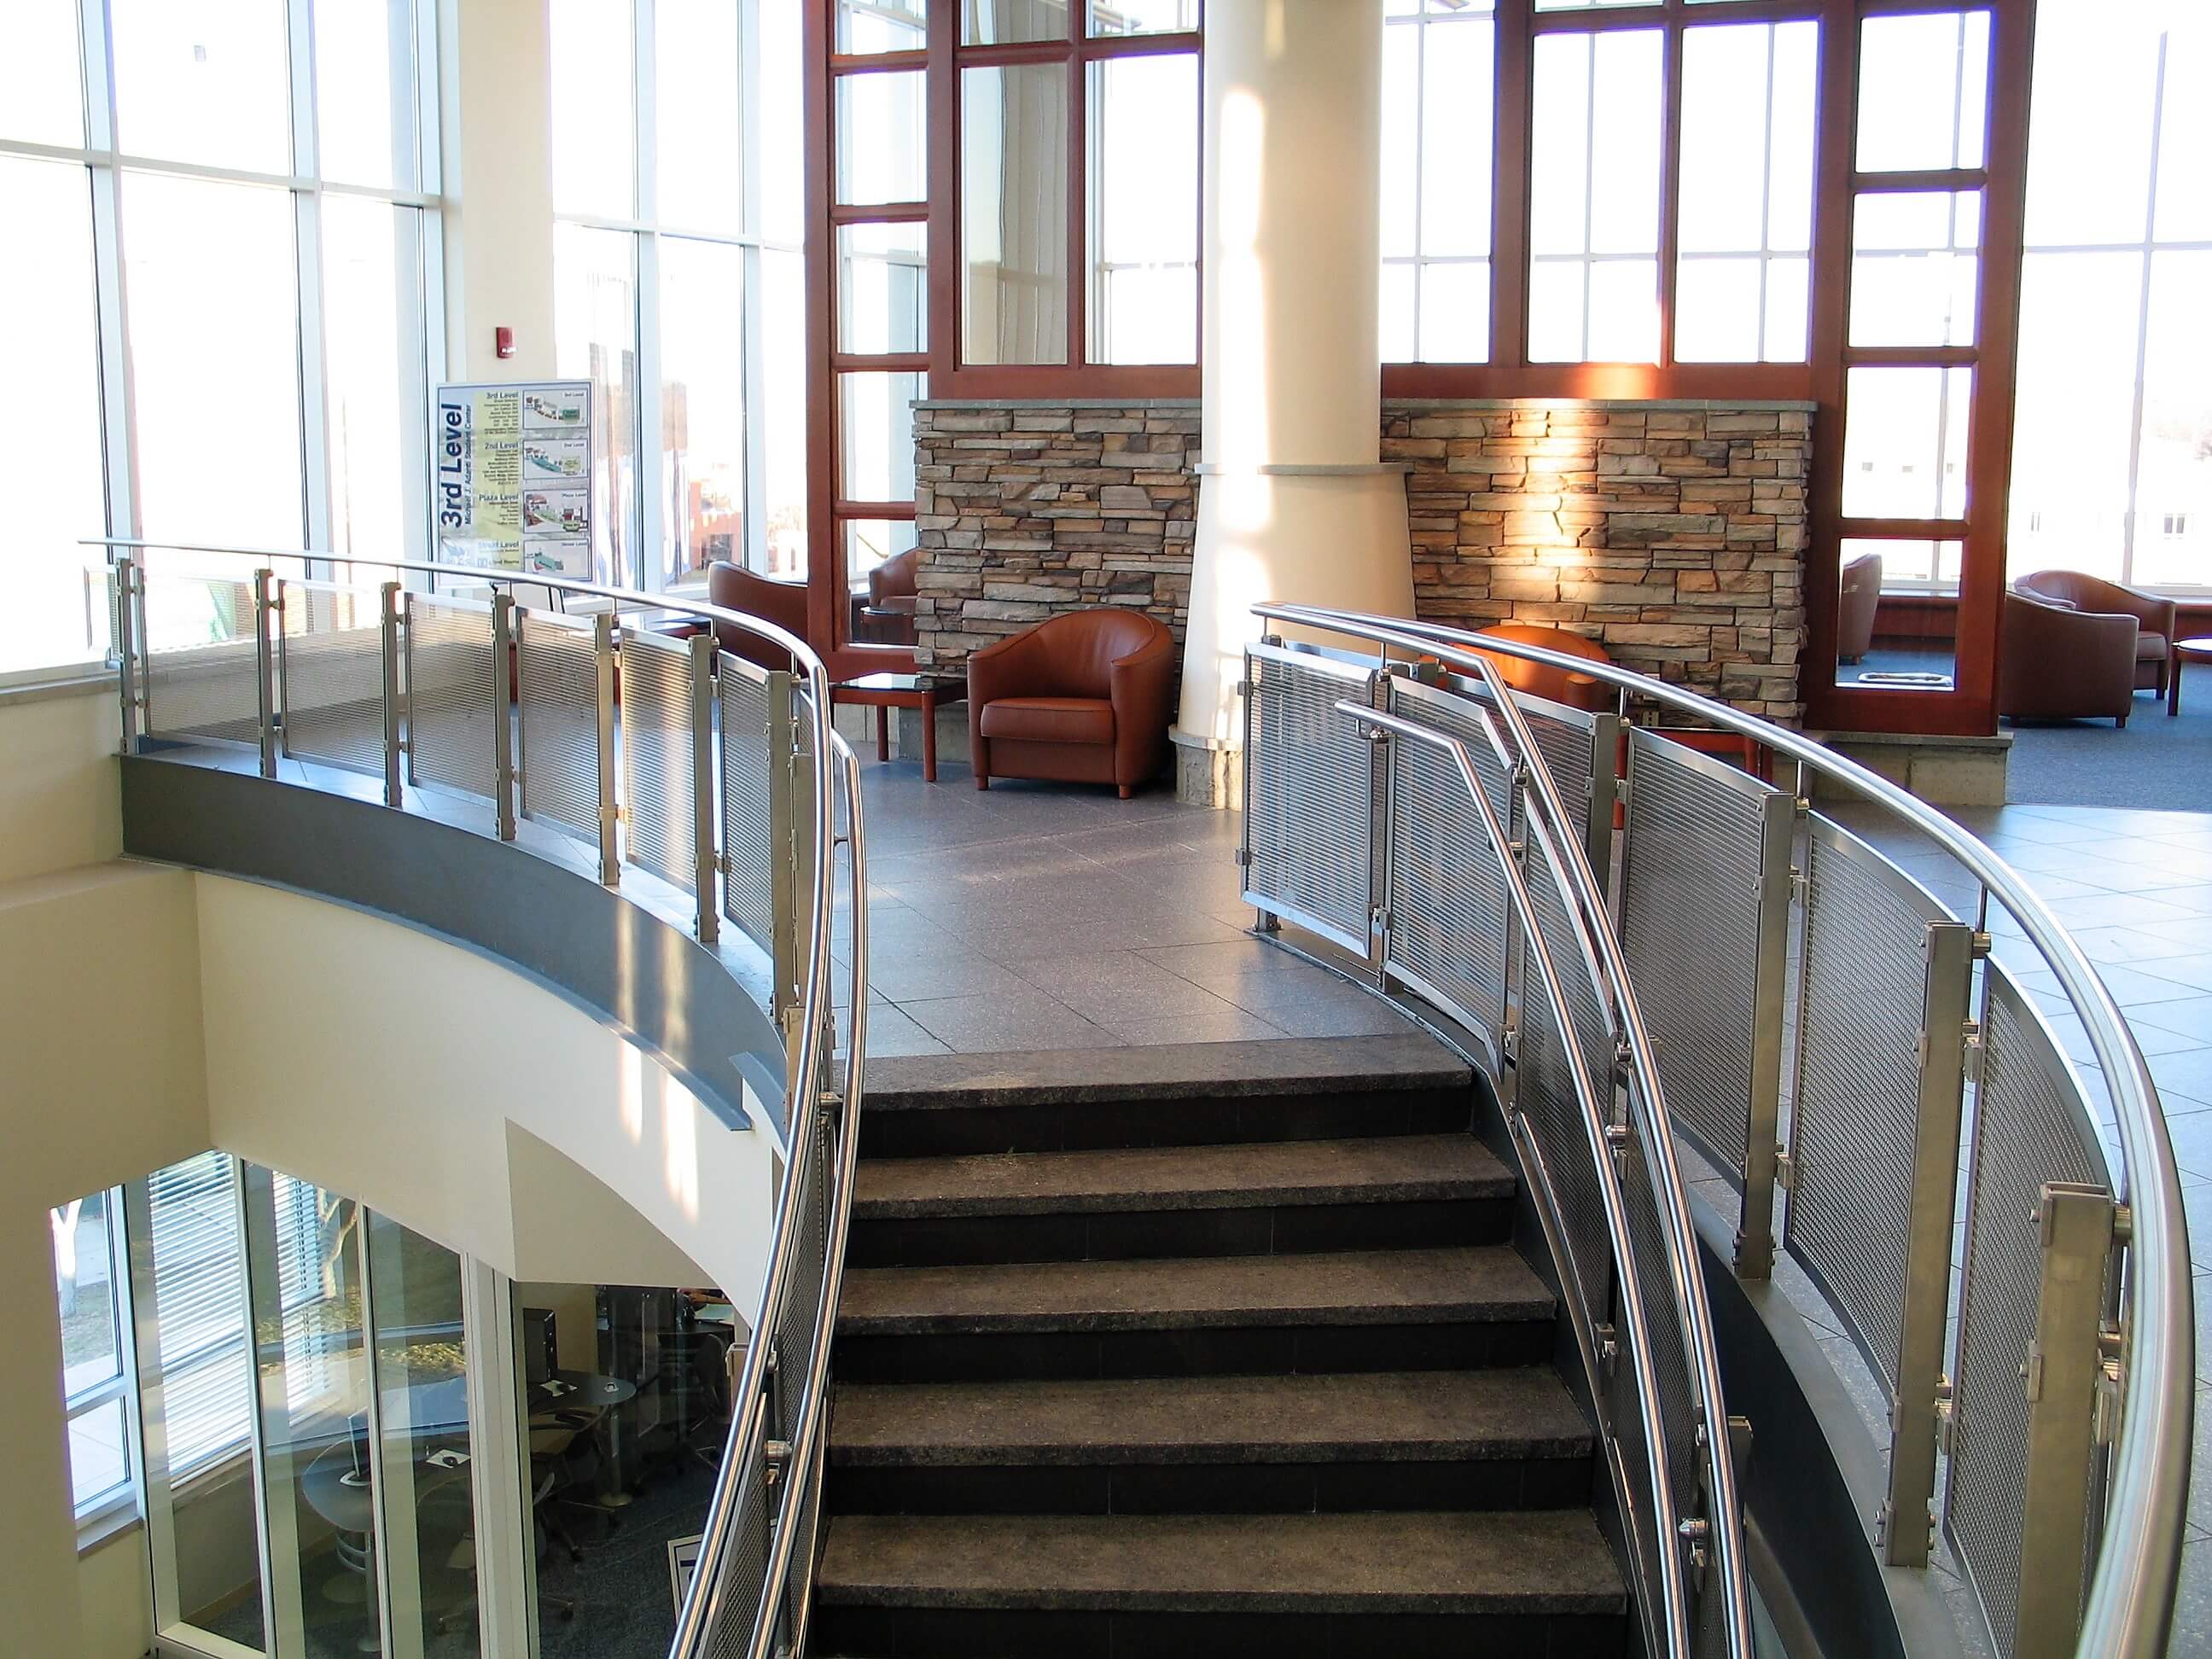 Inox curved handrail with stainless steel infill installation at Southern Connecticut State University, CT.